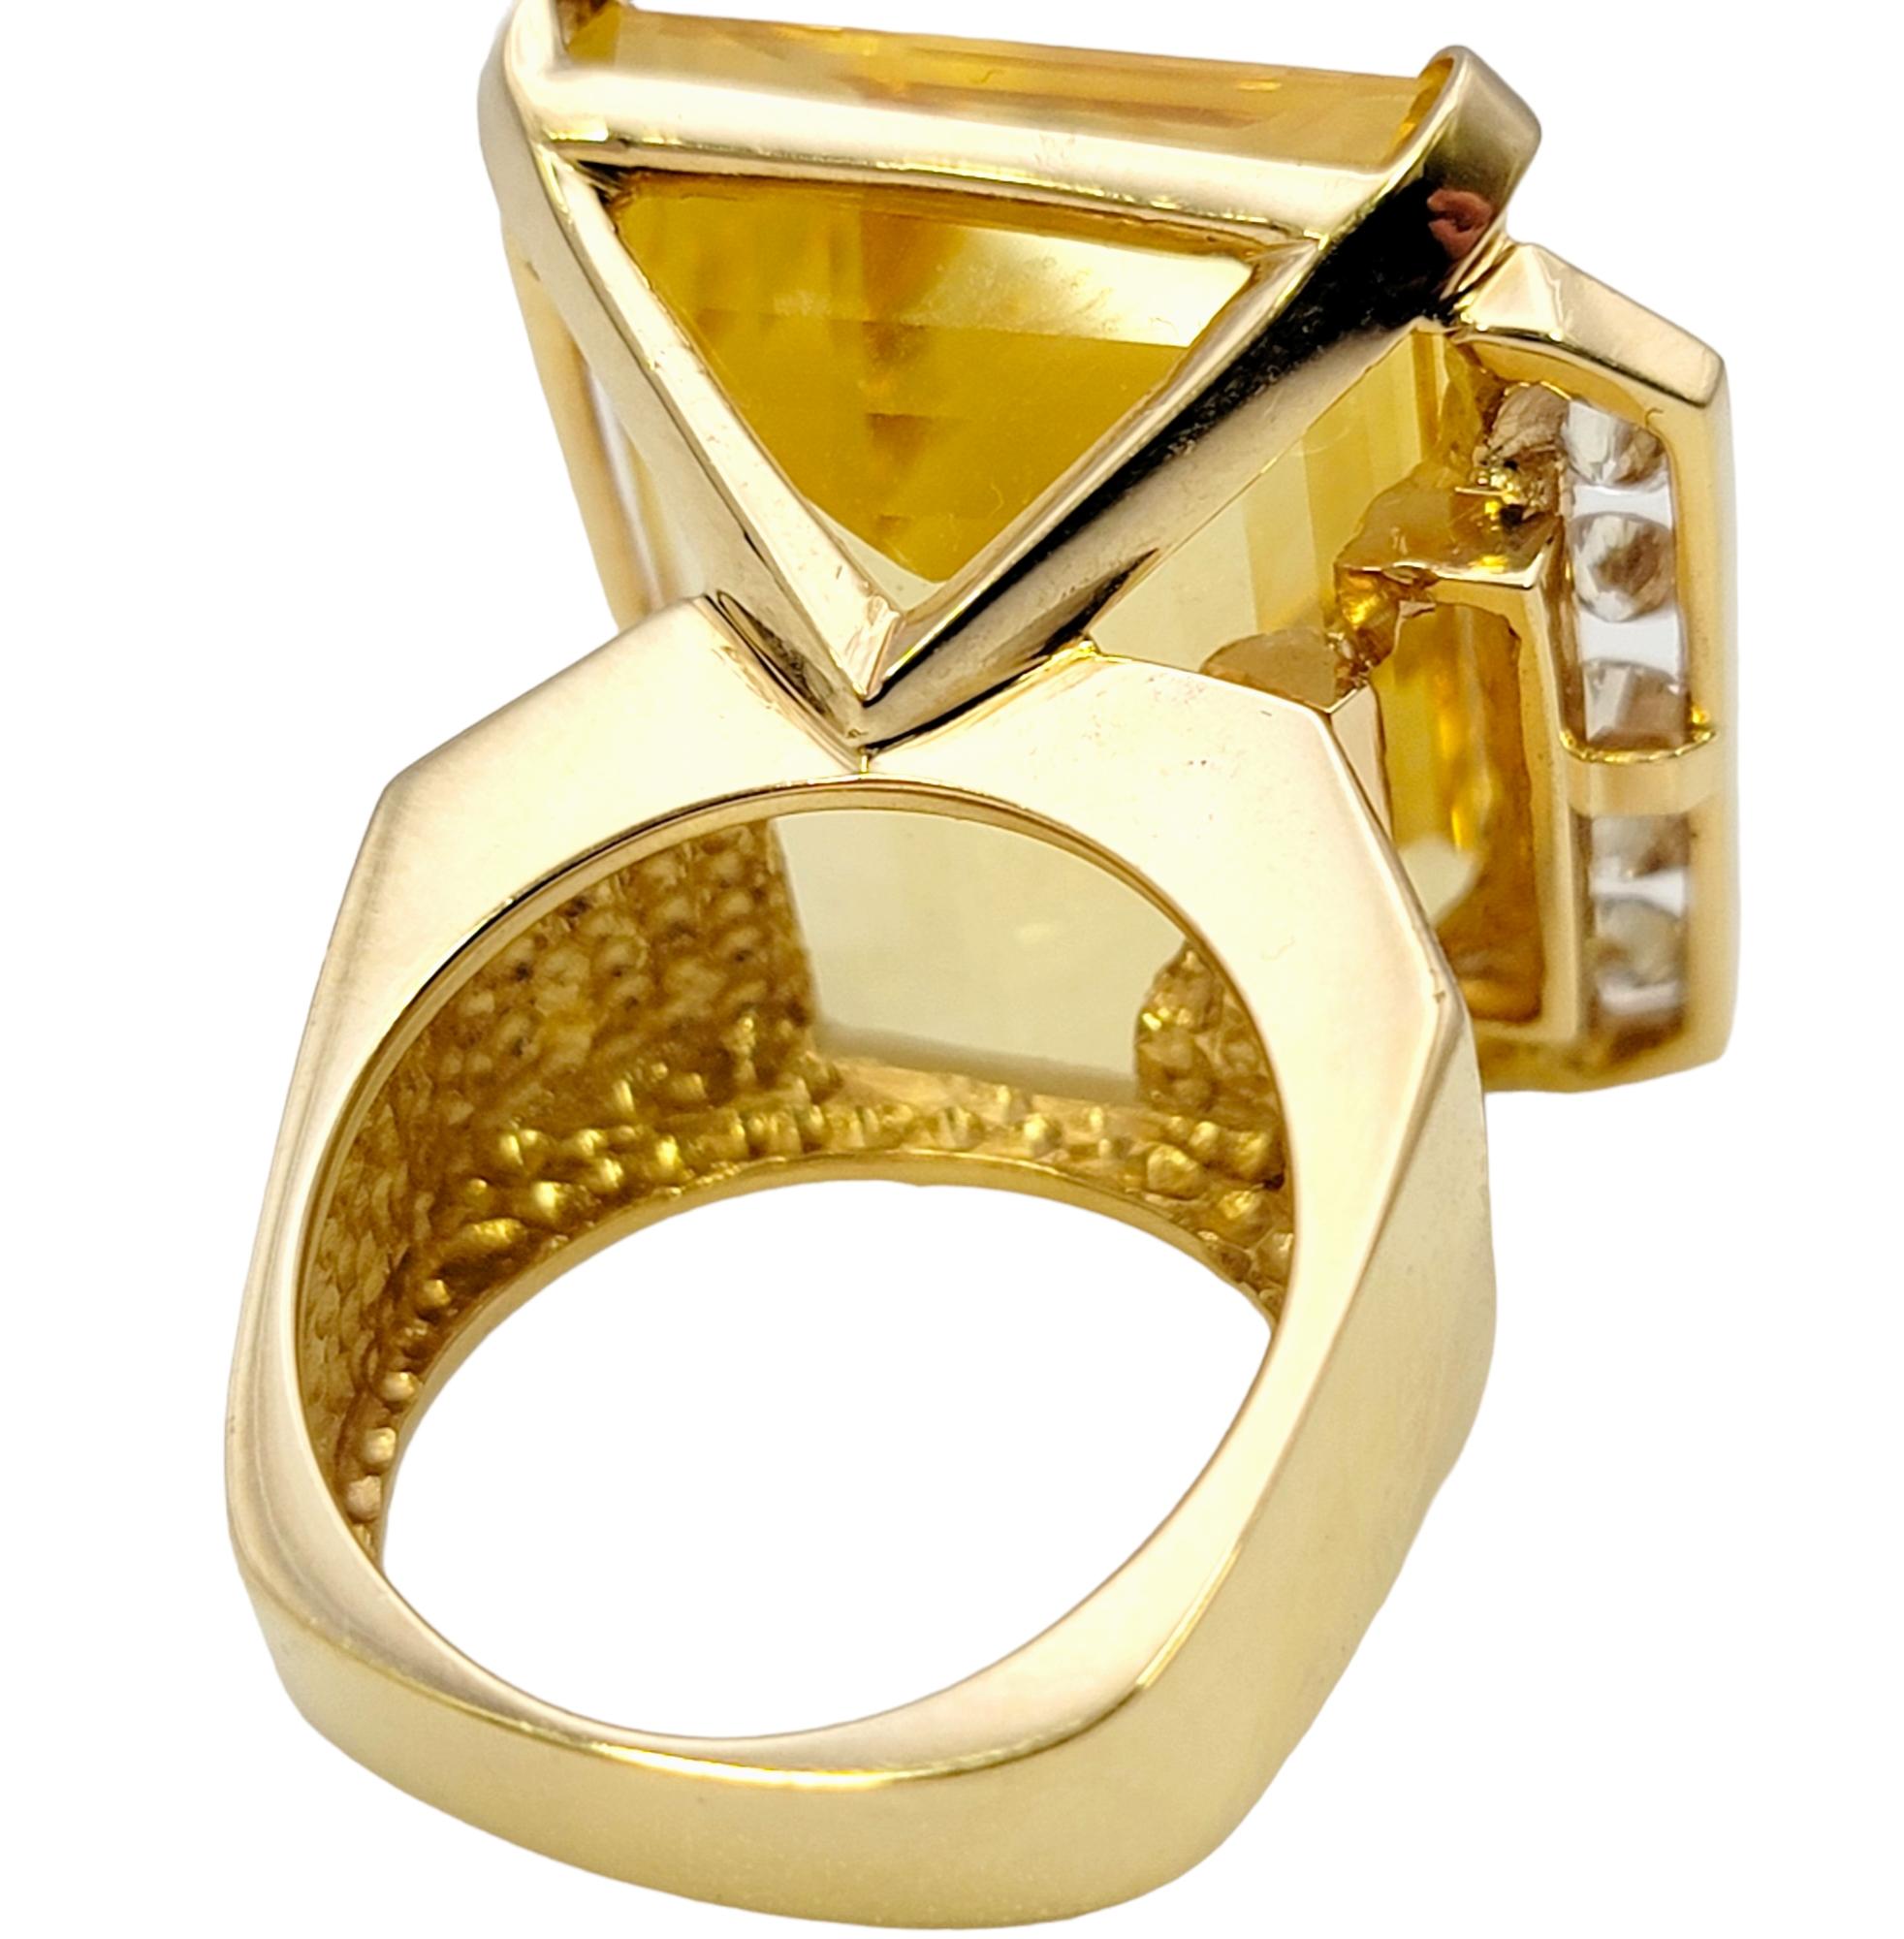 Huge 32.31 Carat Total Emerald Cut Citrine and Diamond Cocktail Ring Yellow Gold For Sale 4